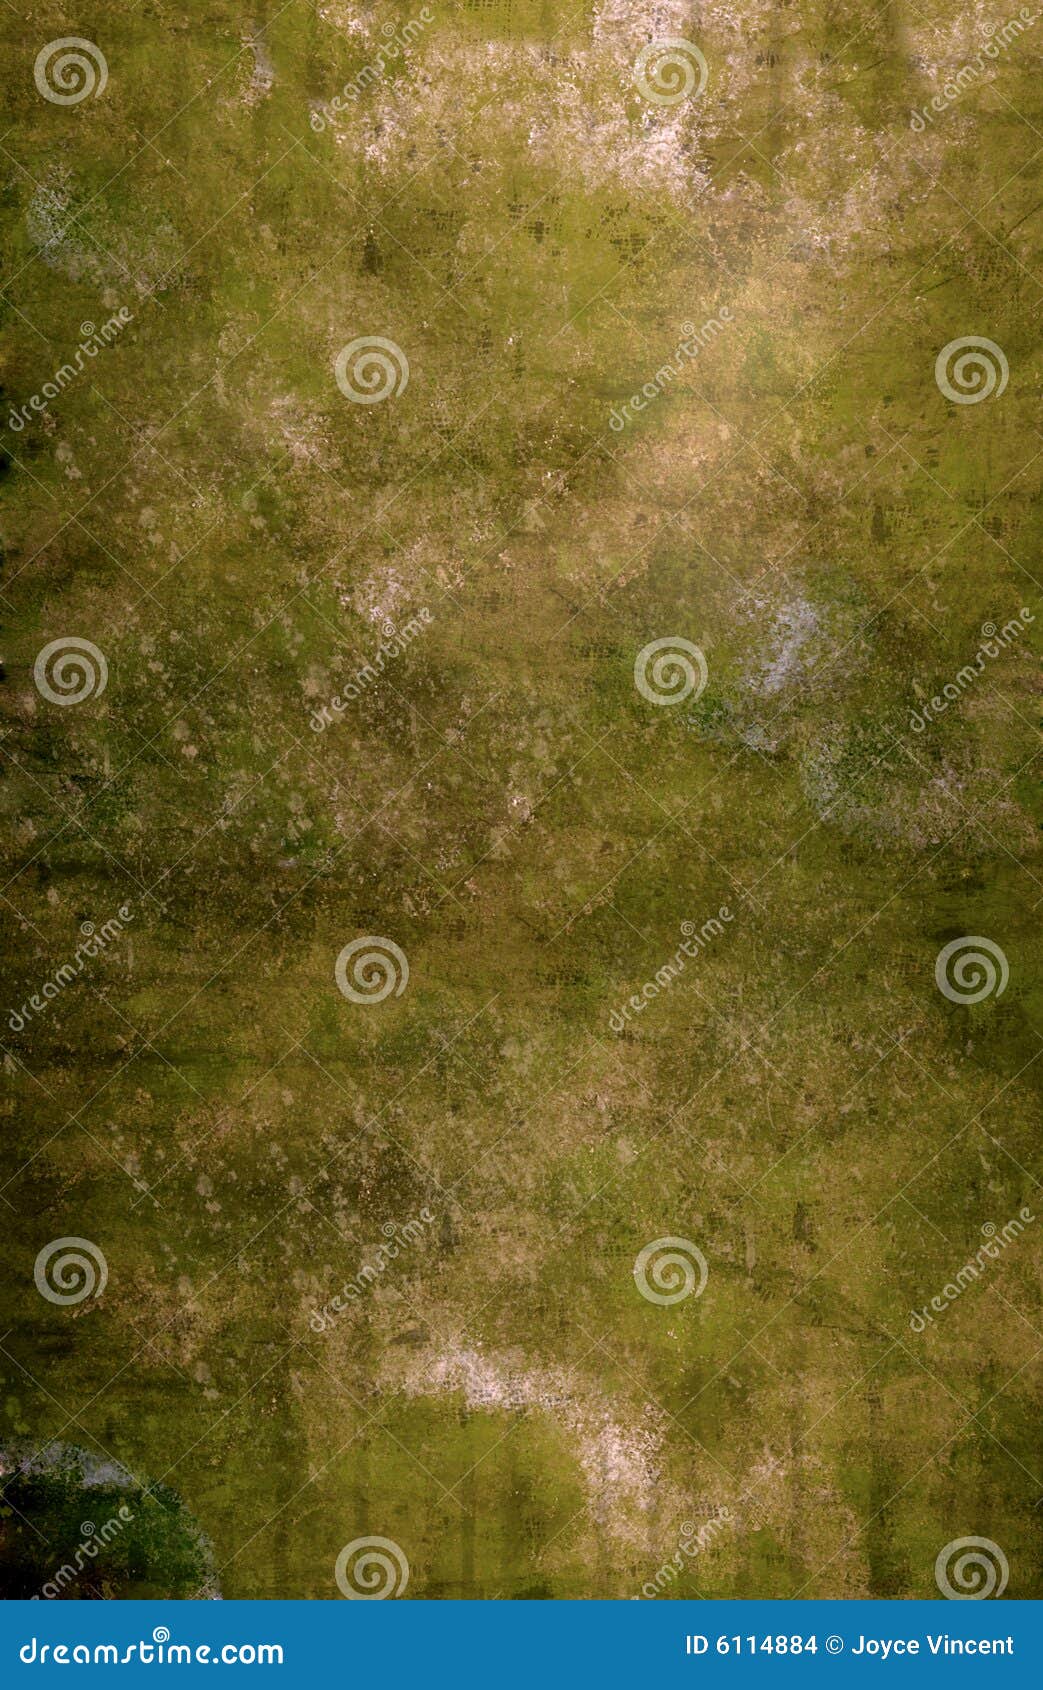 Brown And Green Grunge Background Stock Photo - Image of colors